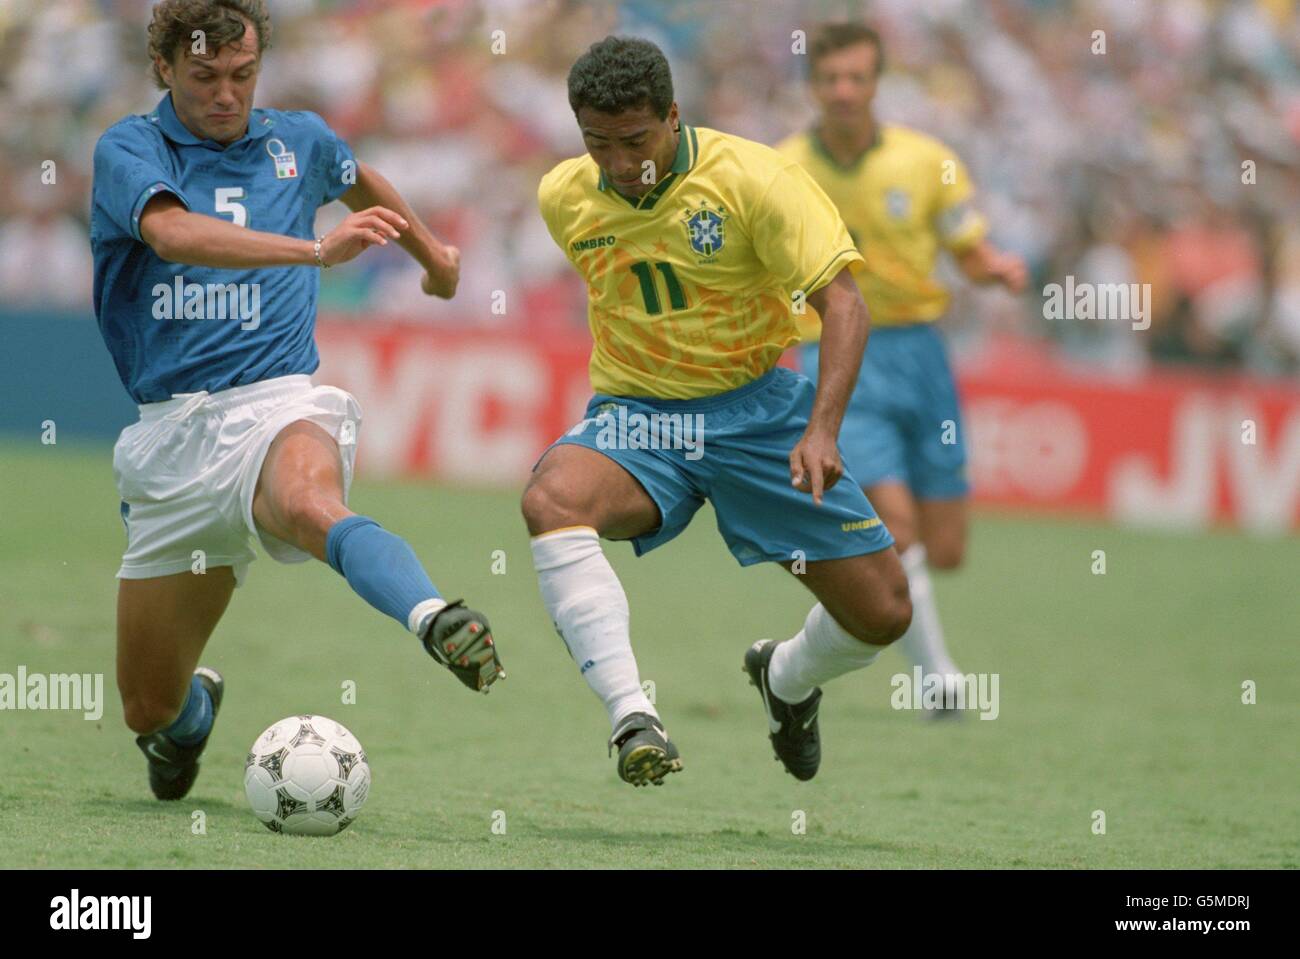 17/7/94, 1994 World Cup Final, Italy v Brazil, Paolo Maldini, italy and Faria Romario, Brazil battle for the ball. Picture by Neal Simpson Stock Photo